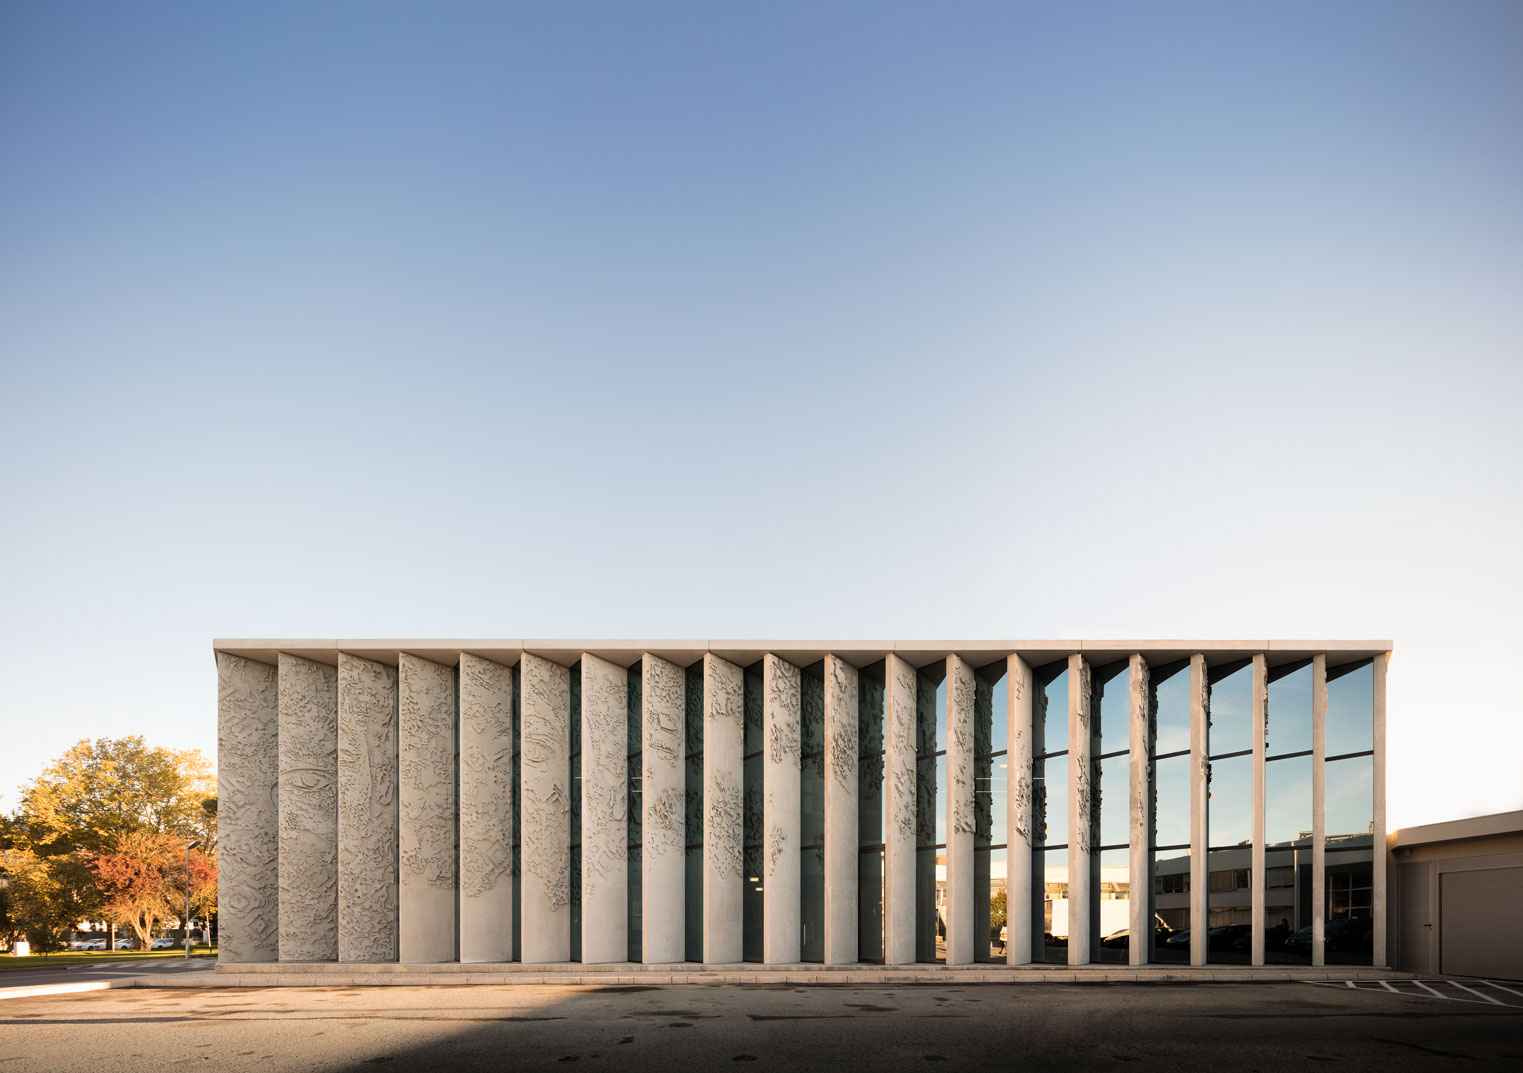 A series of concrete panels make up the facade of the GS1 Portugal